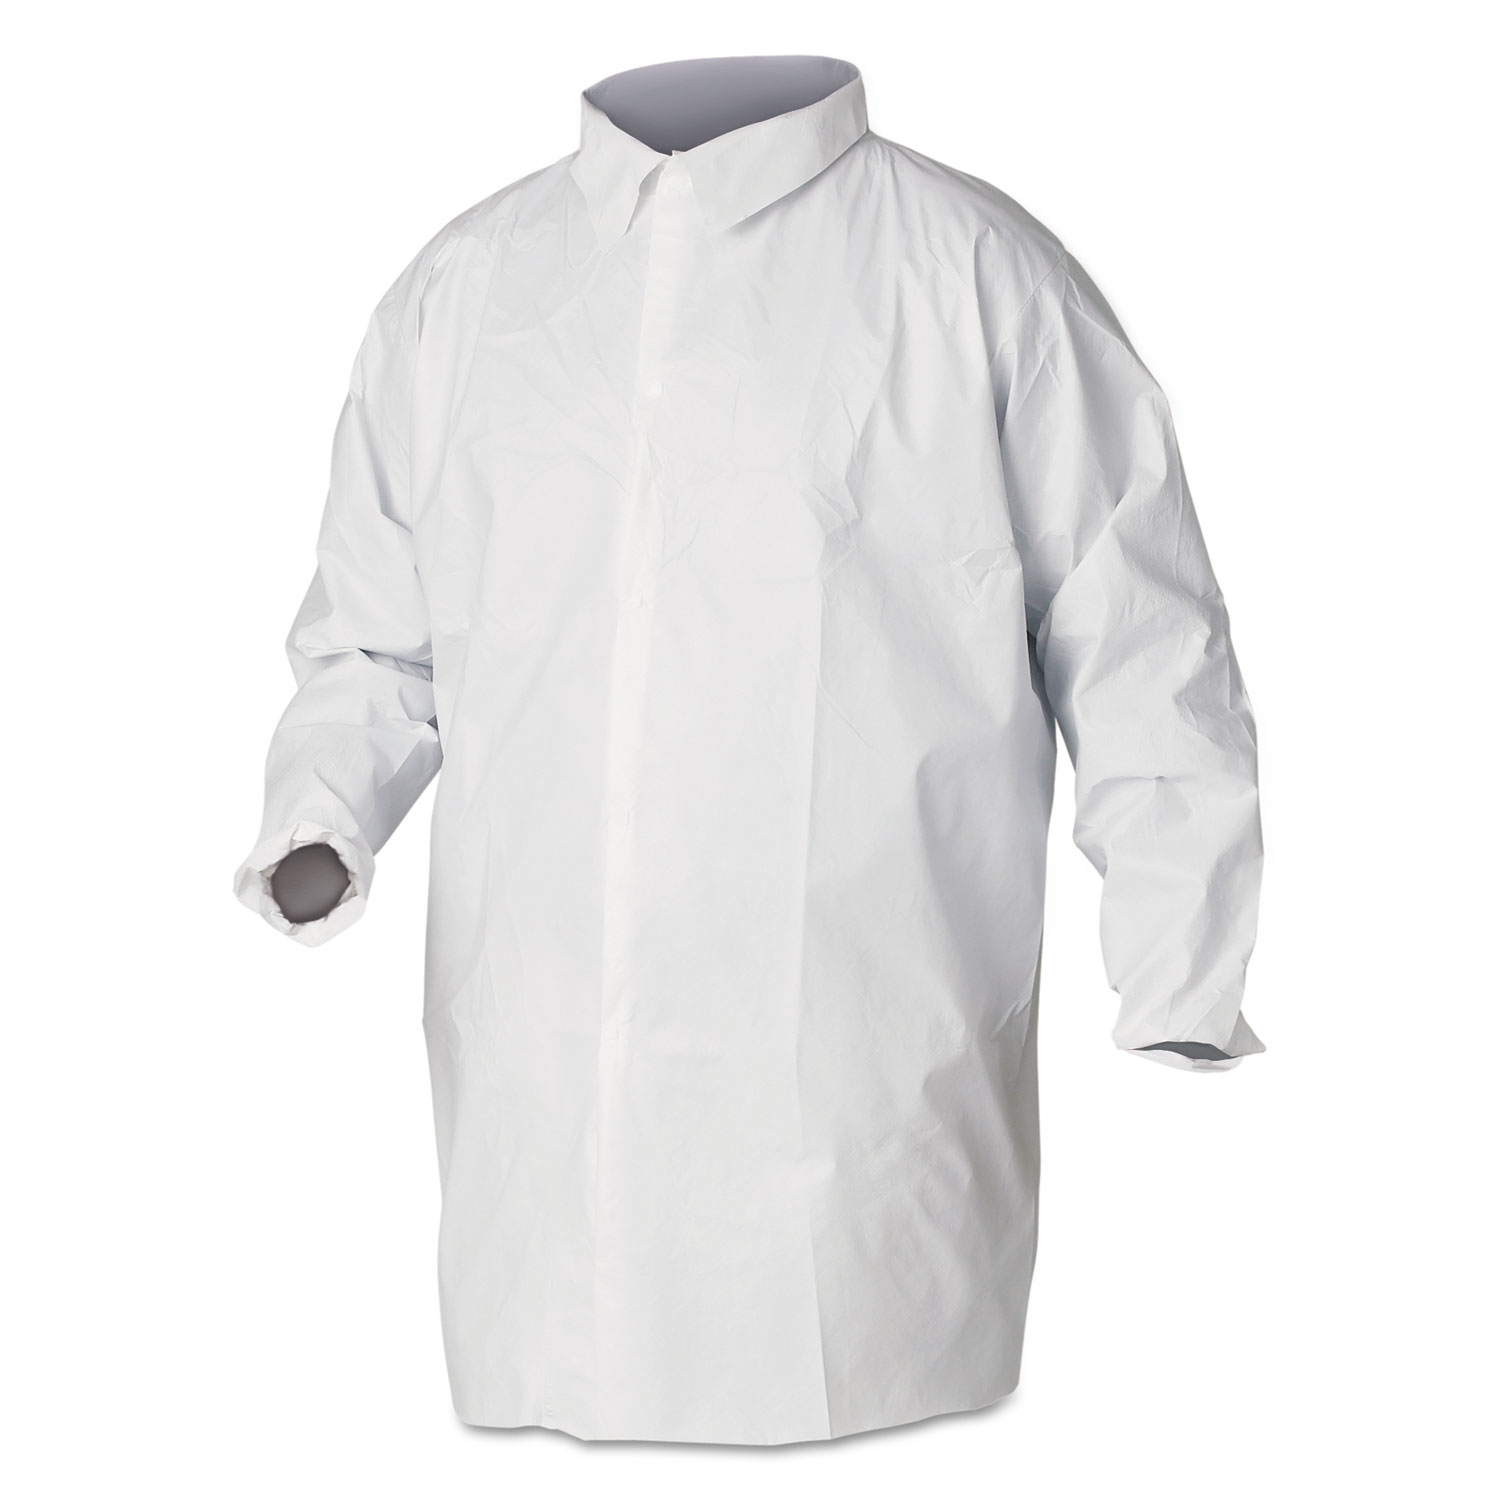  KleenGuard KCC 44445 A40 Liquid and Particle Protection Lab Coats, 2X-Large, White, 30/Carton (KCC44445) 